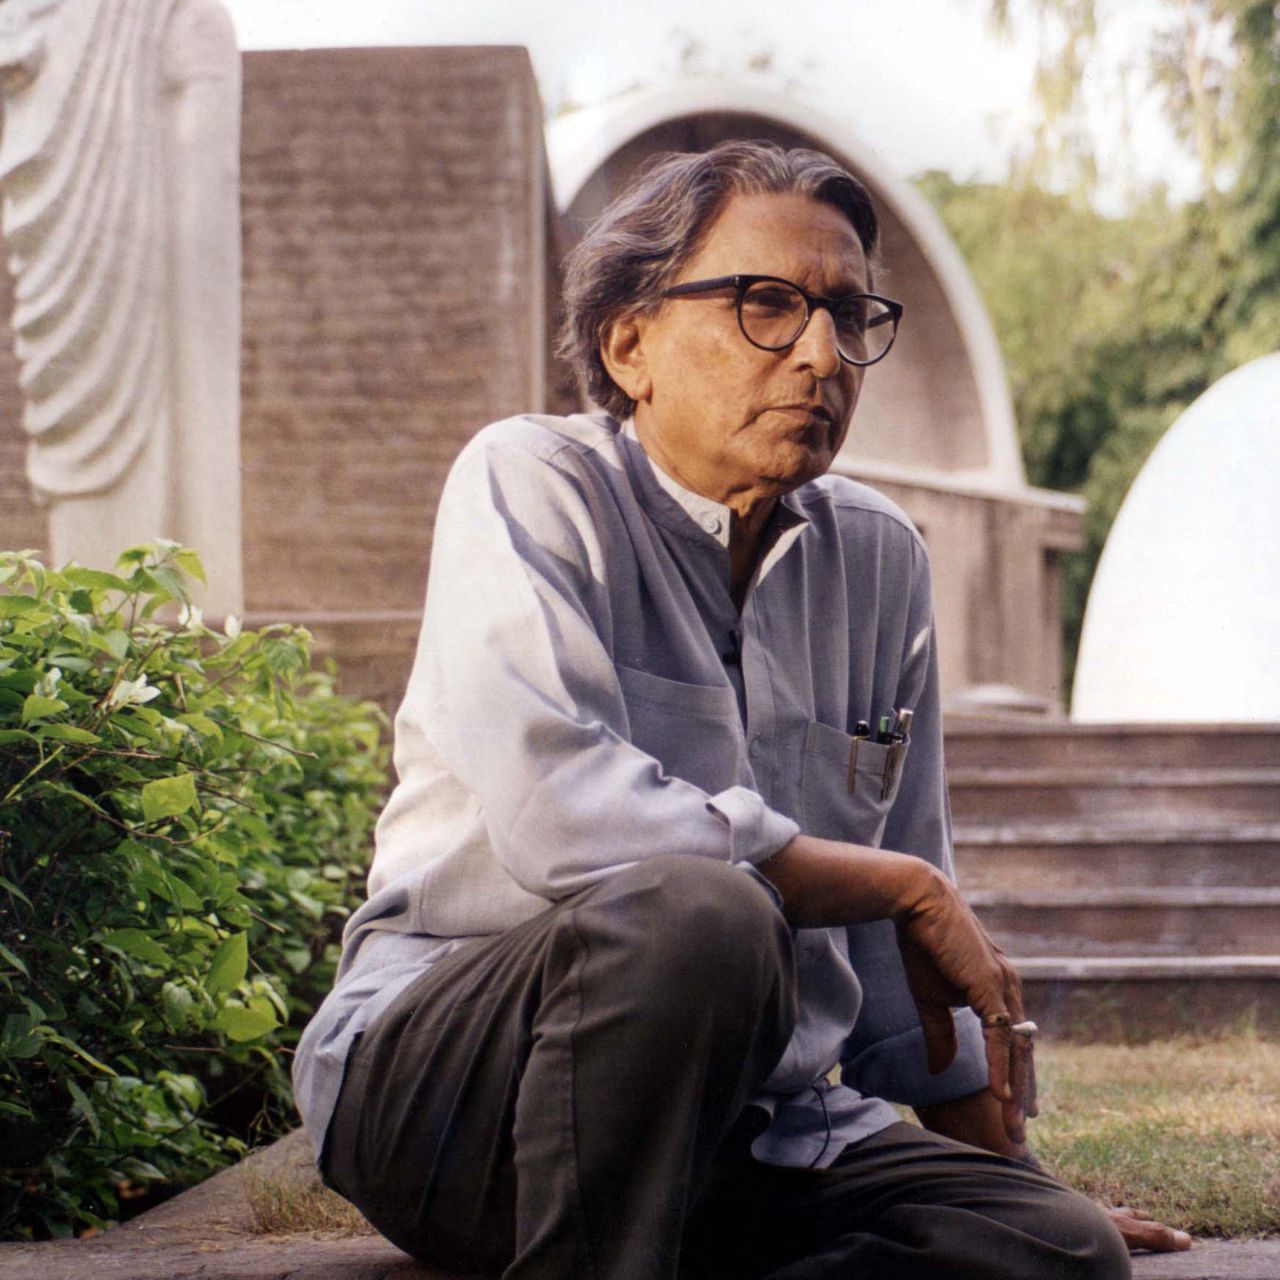 <a href="https://www.cnn.com/style/article/balkrishna-doshi-architect-death/index.html" target="_blank">Balkrishna Doshi</a>, one of the Indian subcontinent's most celebrated architects, died January 24 at the age of 95. He was India's first — and to date, only — winner of the Pritzker Prize, the profession's equivalent to the Nobel Prize.